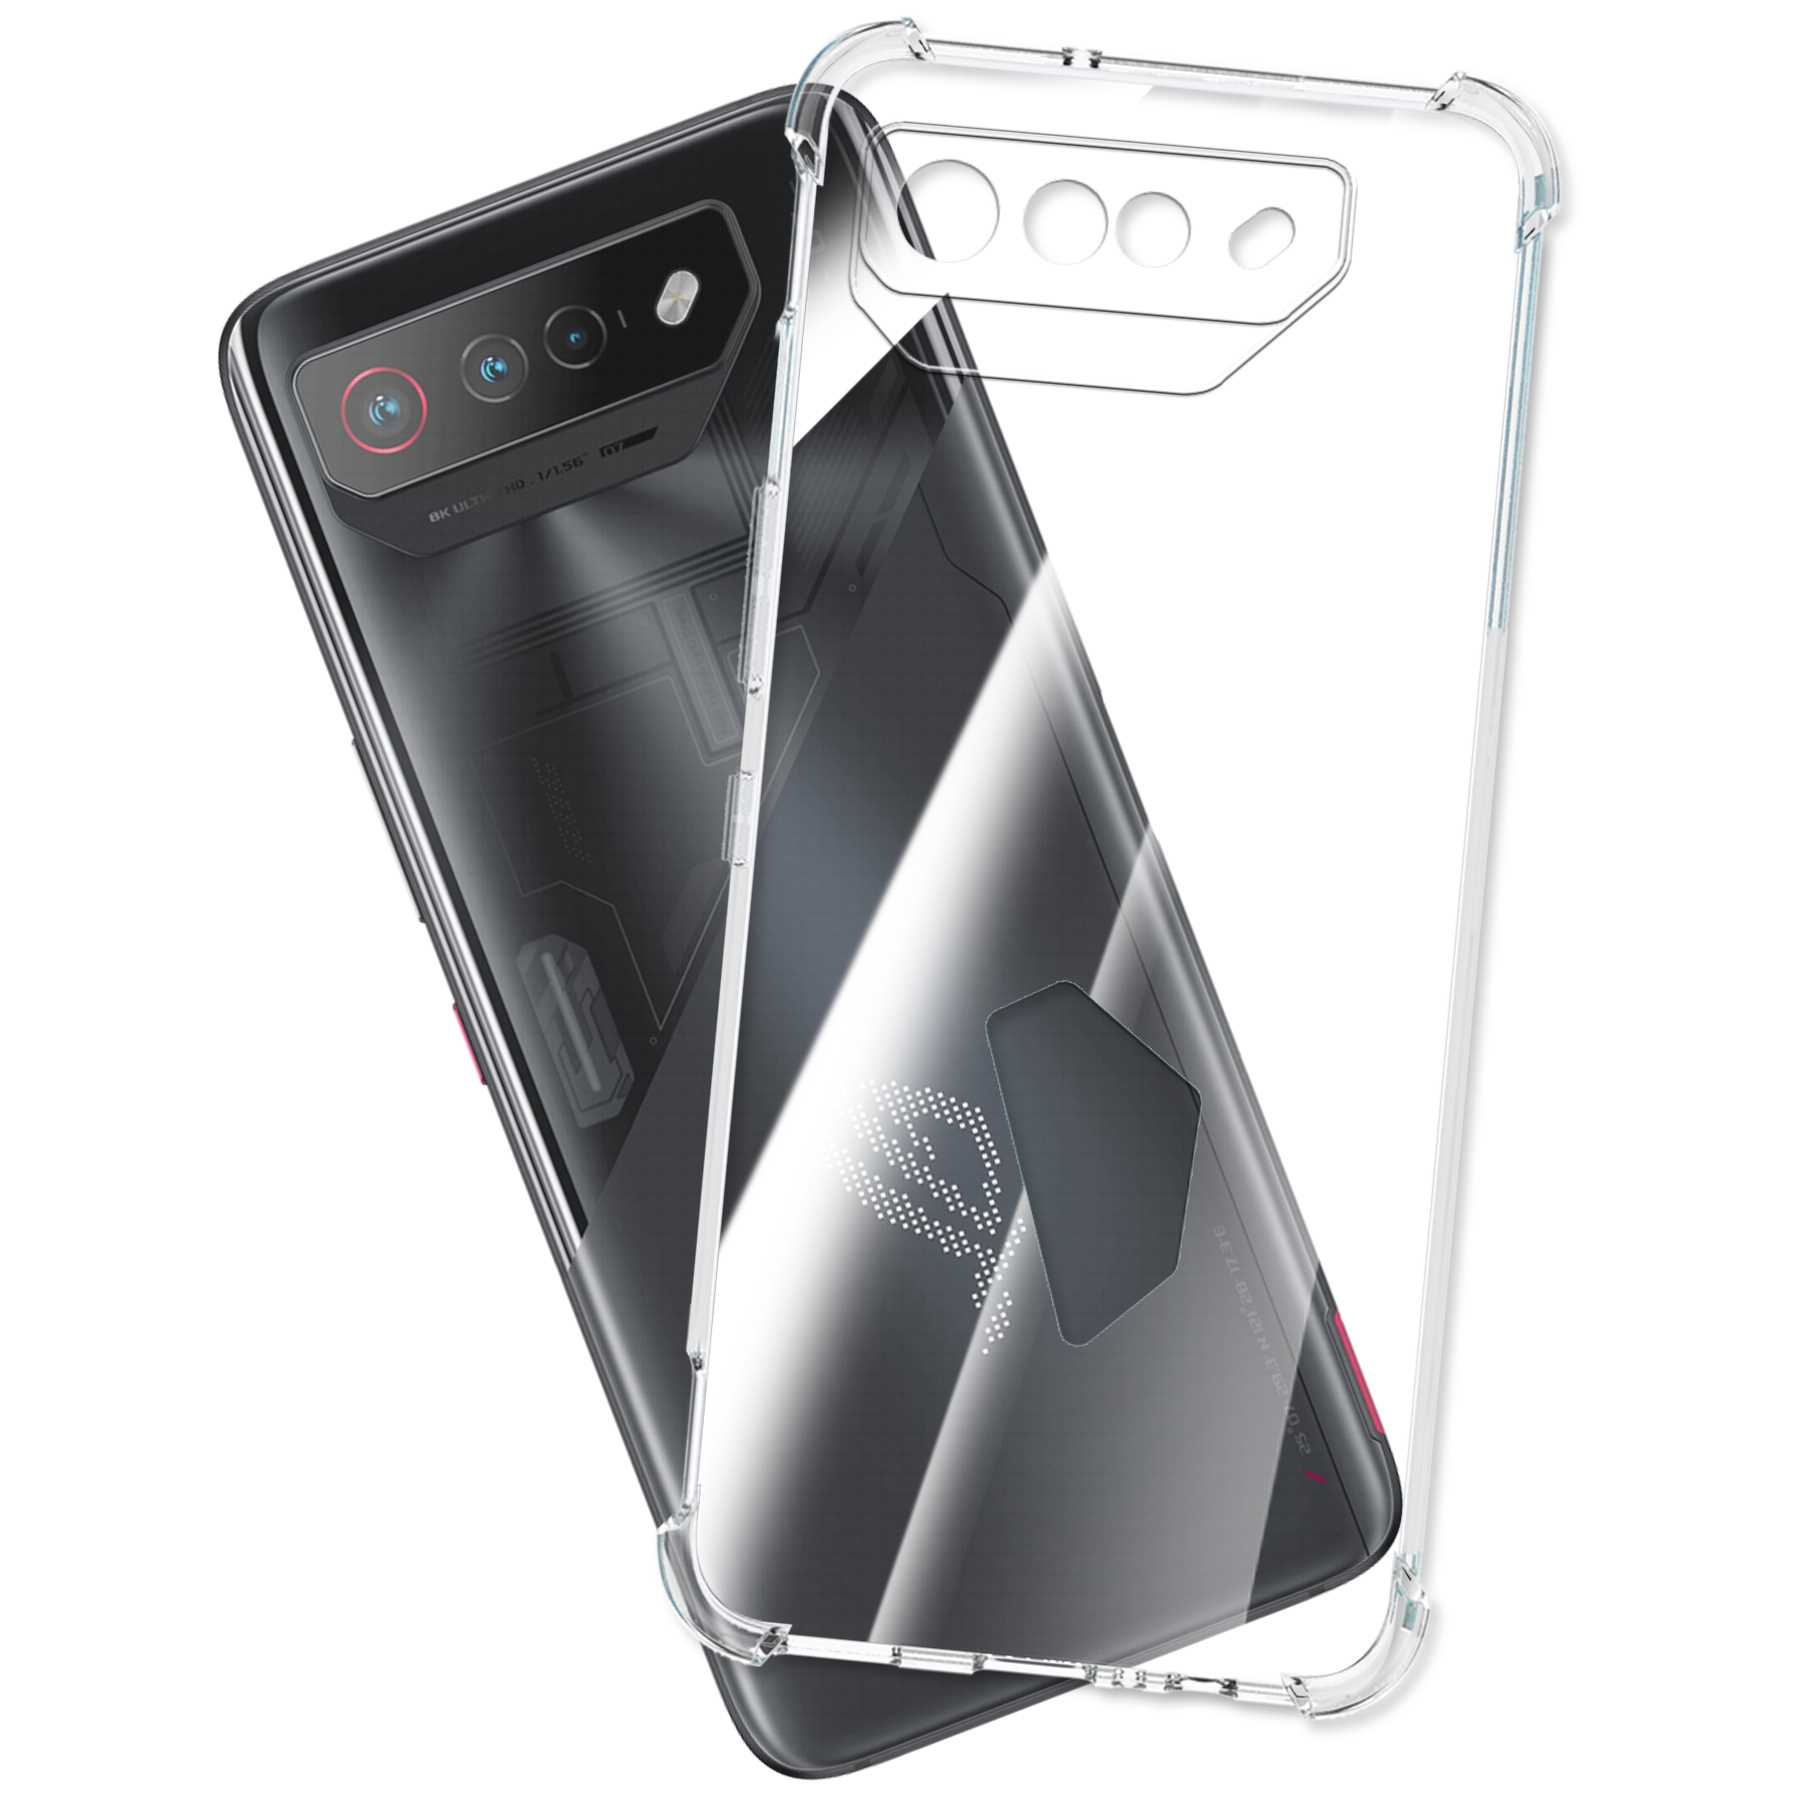 Clear Armor MTB ENERGY Transparent MORE Case, Phone Asus, 7, ROG Backcover,